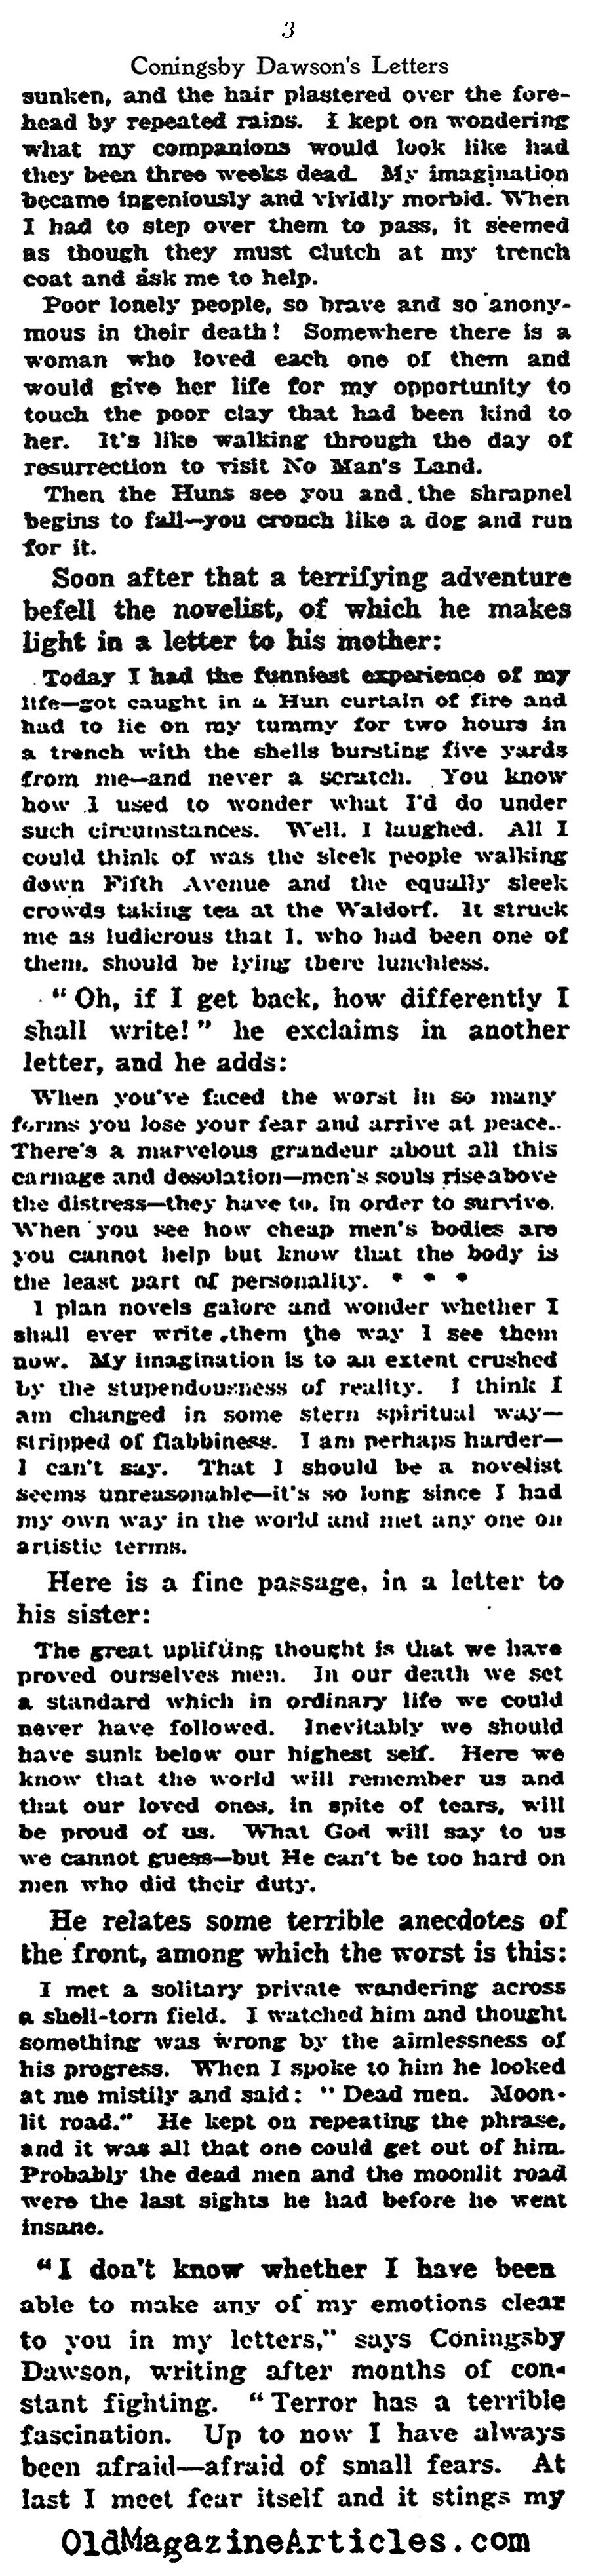 CARRY ON by Coningsby Dawson (NY Times, 1917)